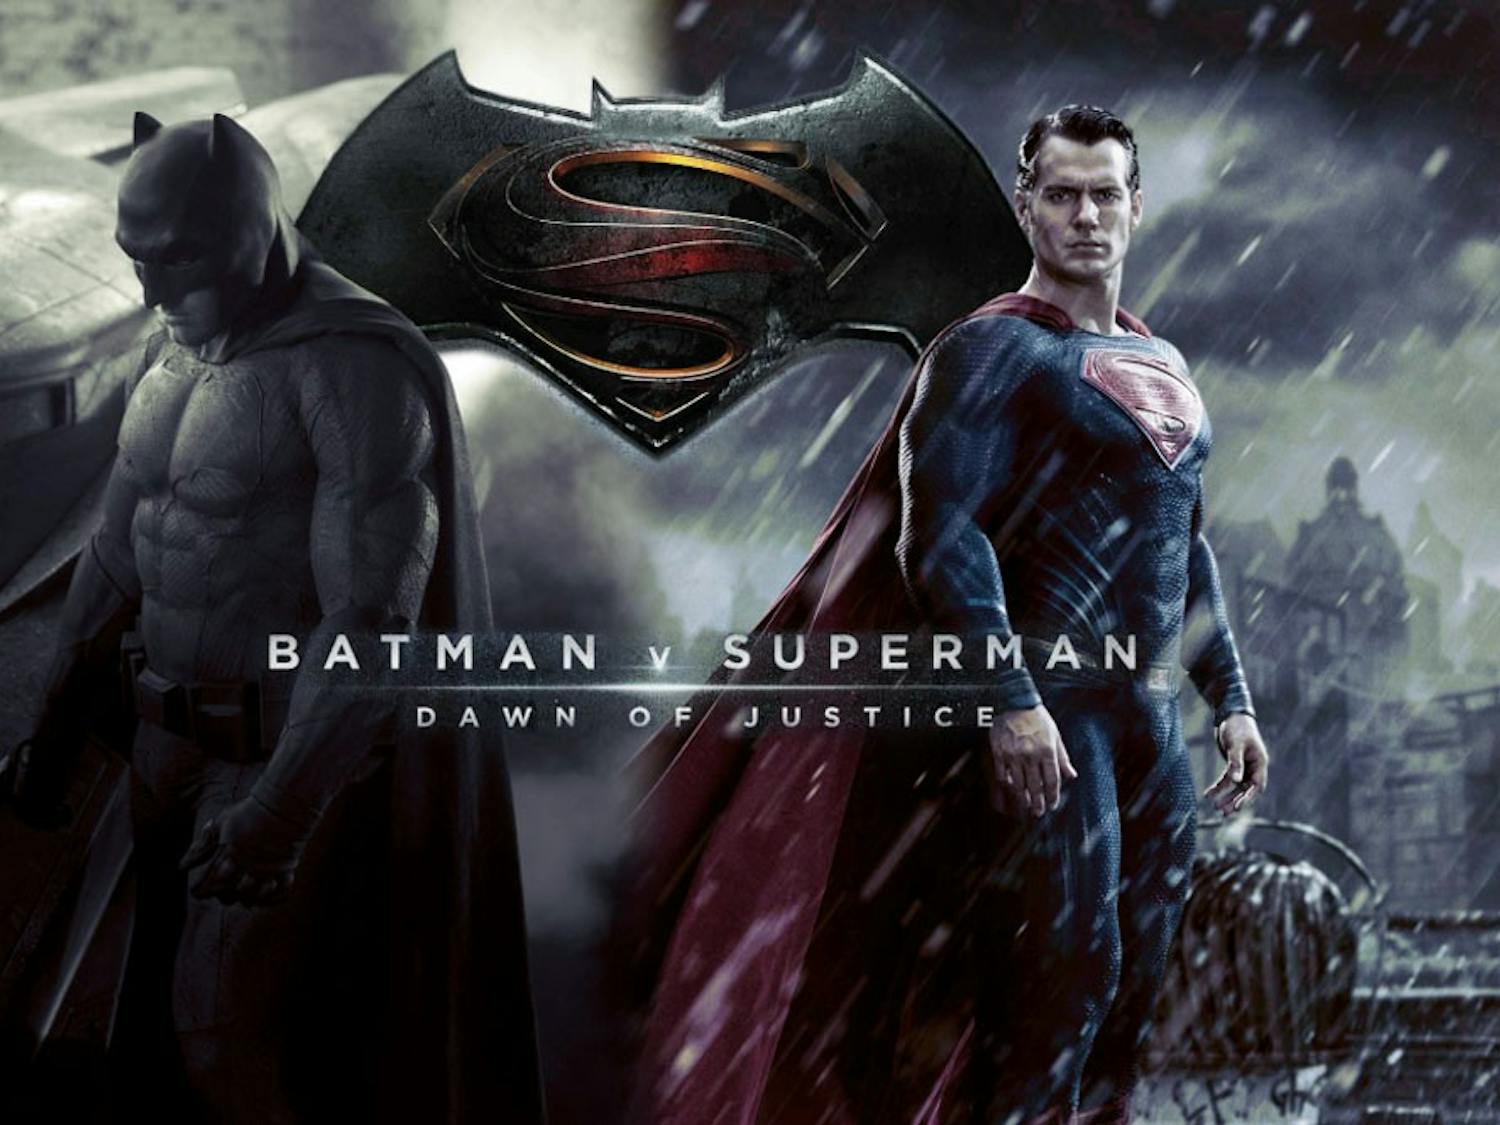 "Batman V Superman: Dawn of Justice" will pit two iconic superheroes against one another on the big screen for the first time ever. UB students weighed in on who they think will win.&nbsp;